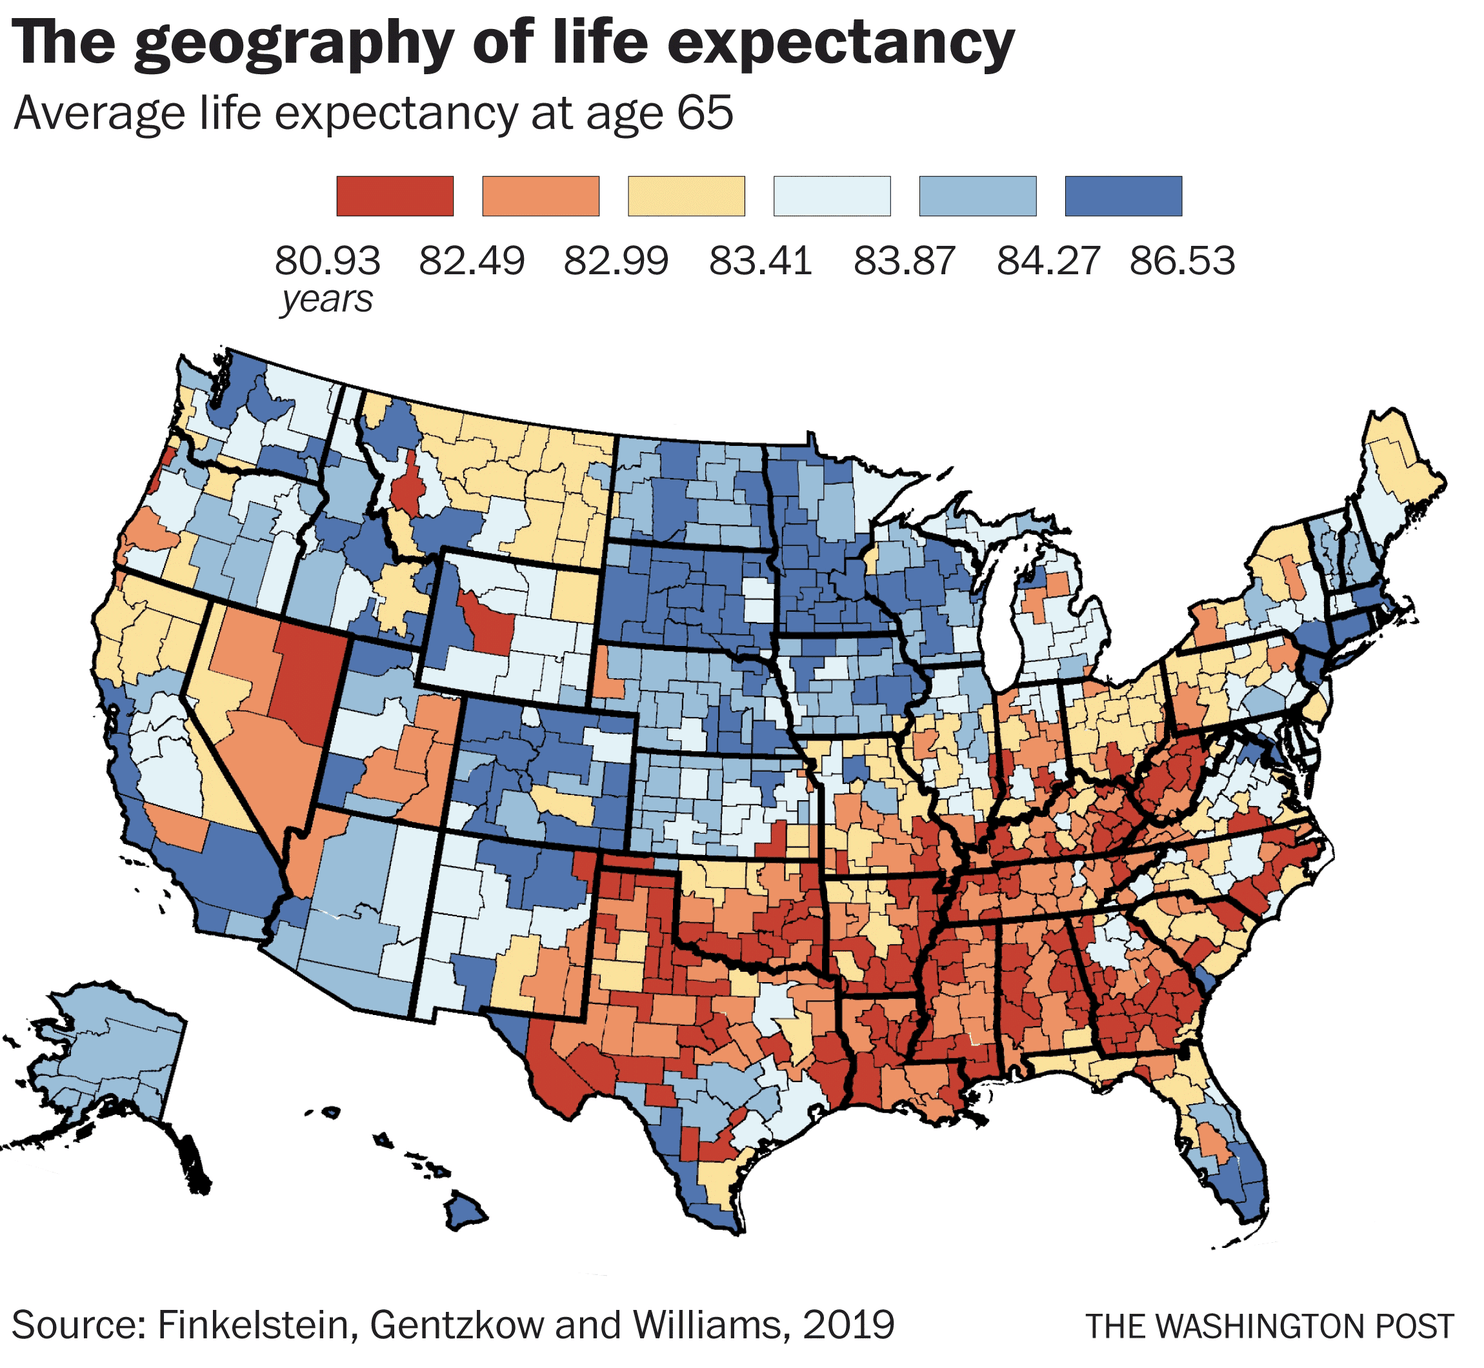 Life expectancy is. USA Life expectancy. Life expectancy USA States. Life expectancy by Country. Average Life expectancy.